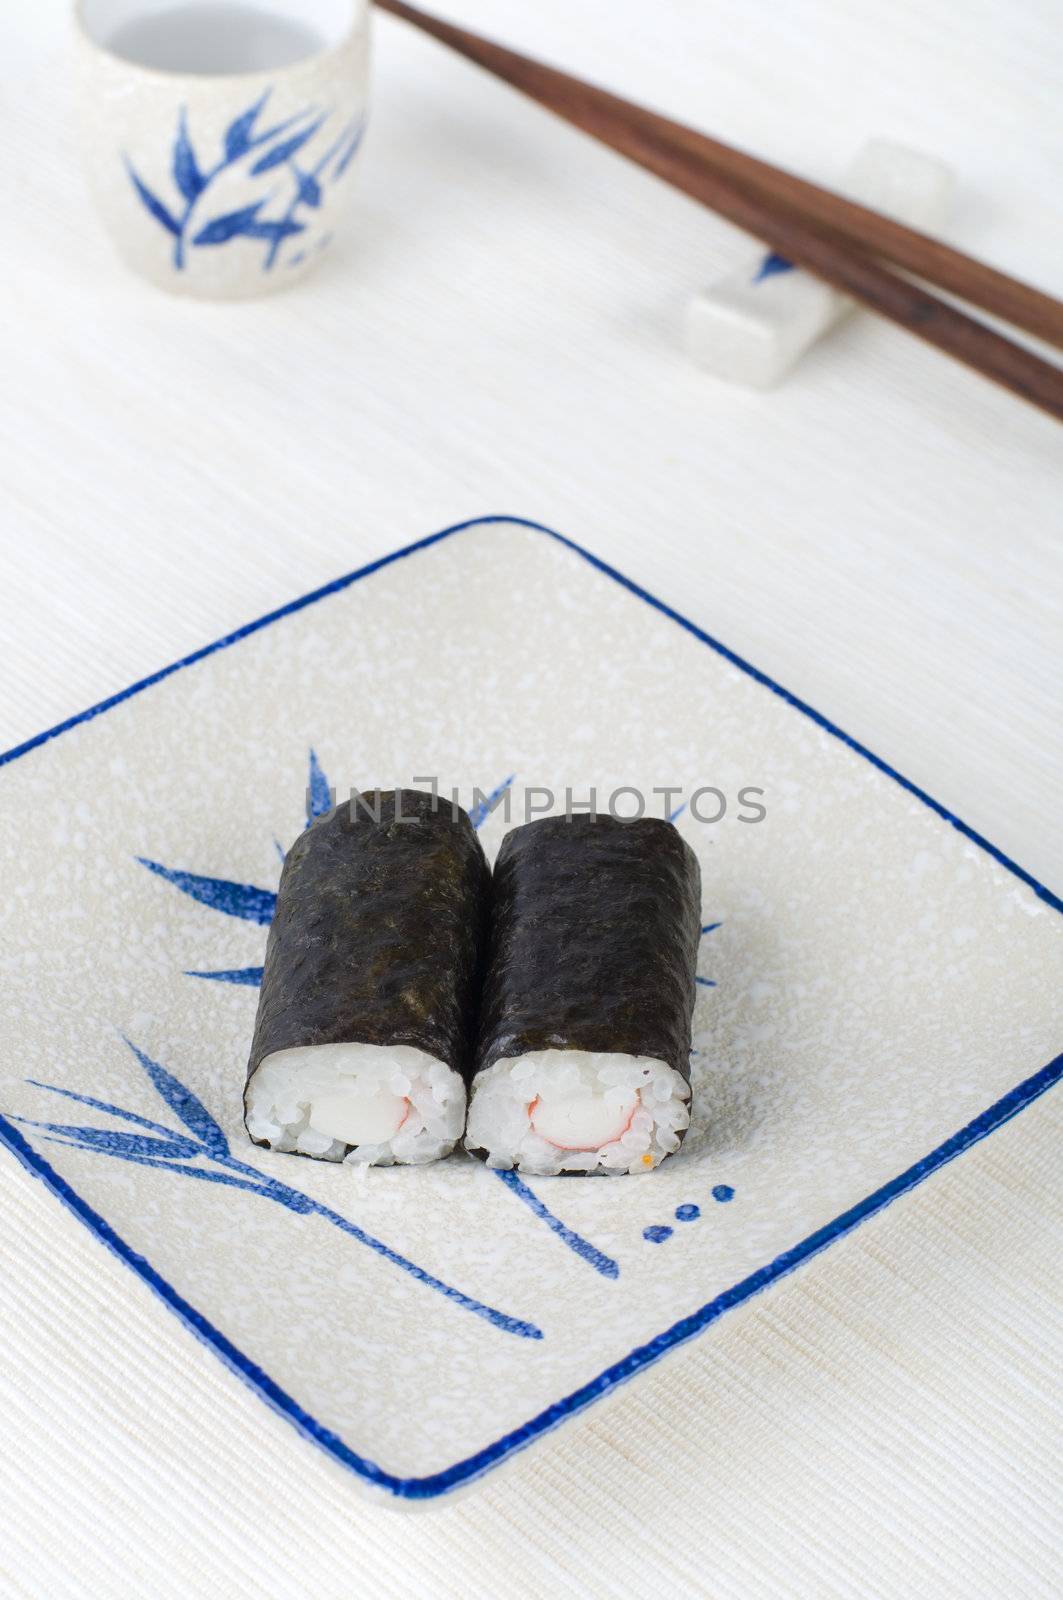 sushi on a plate with chopstick and tea cup by yuliang11